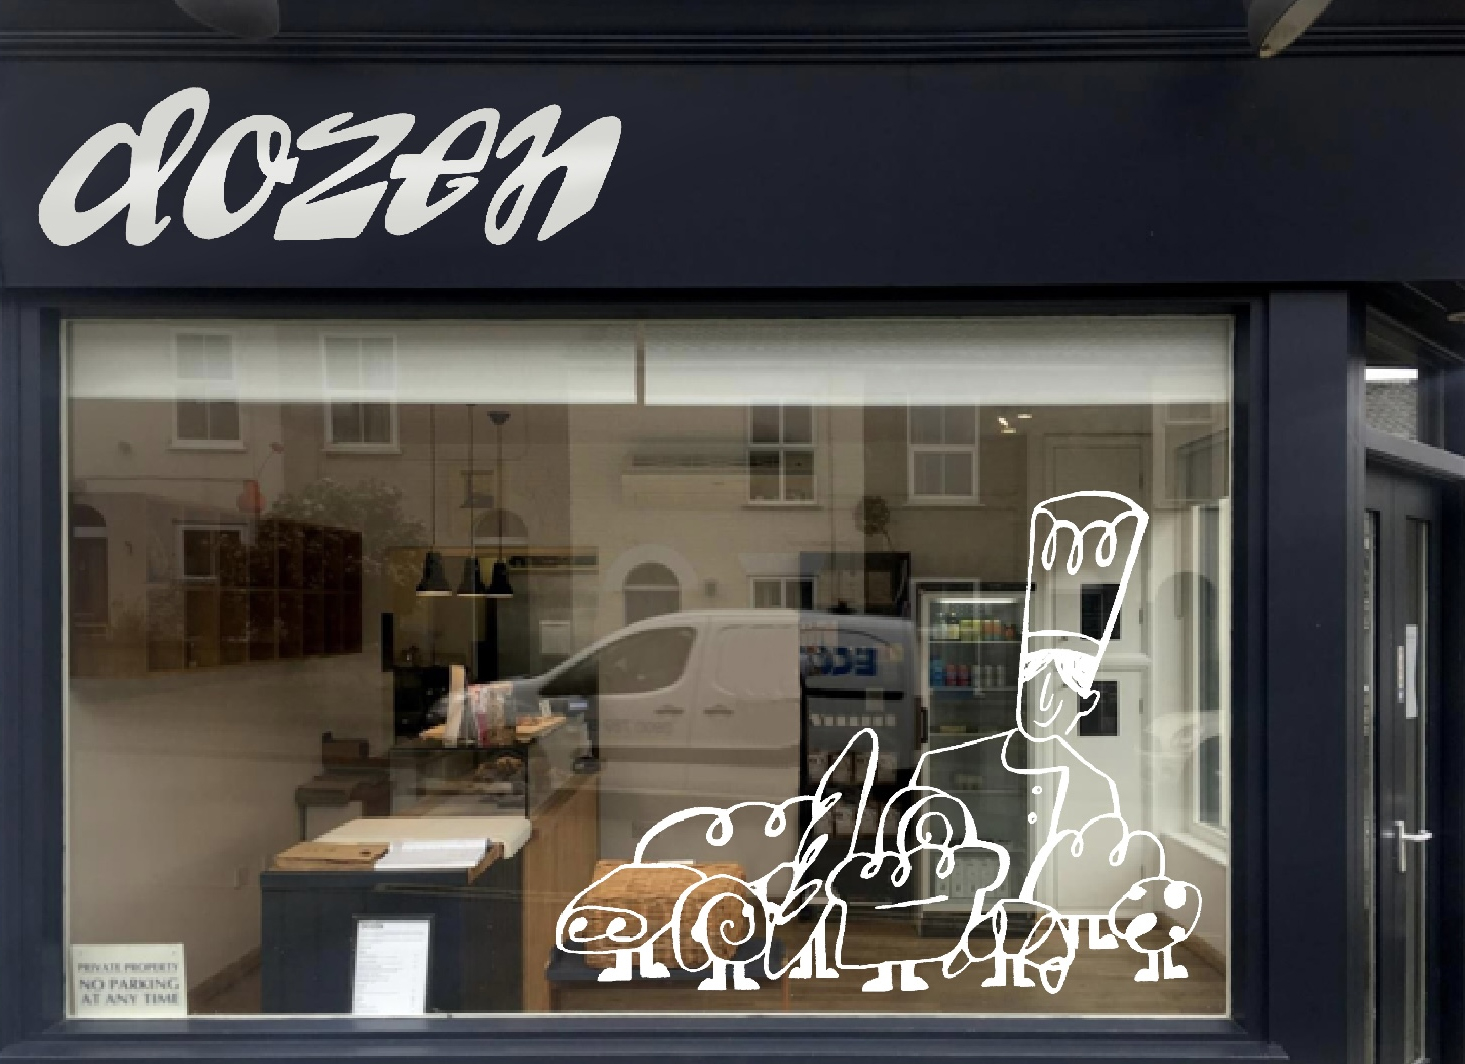 Bakery shopfront by Andrea Hammersley showing illustrated baked goods and chef character as a window display and a sign made from swirling typography.